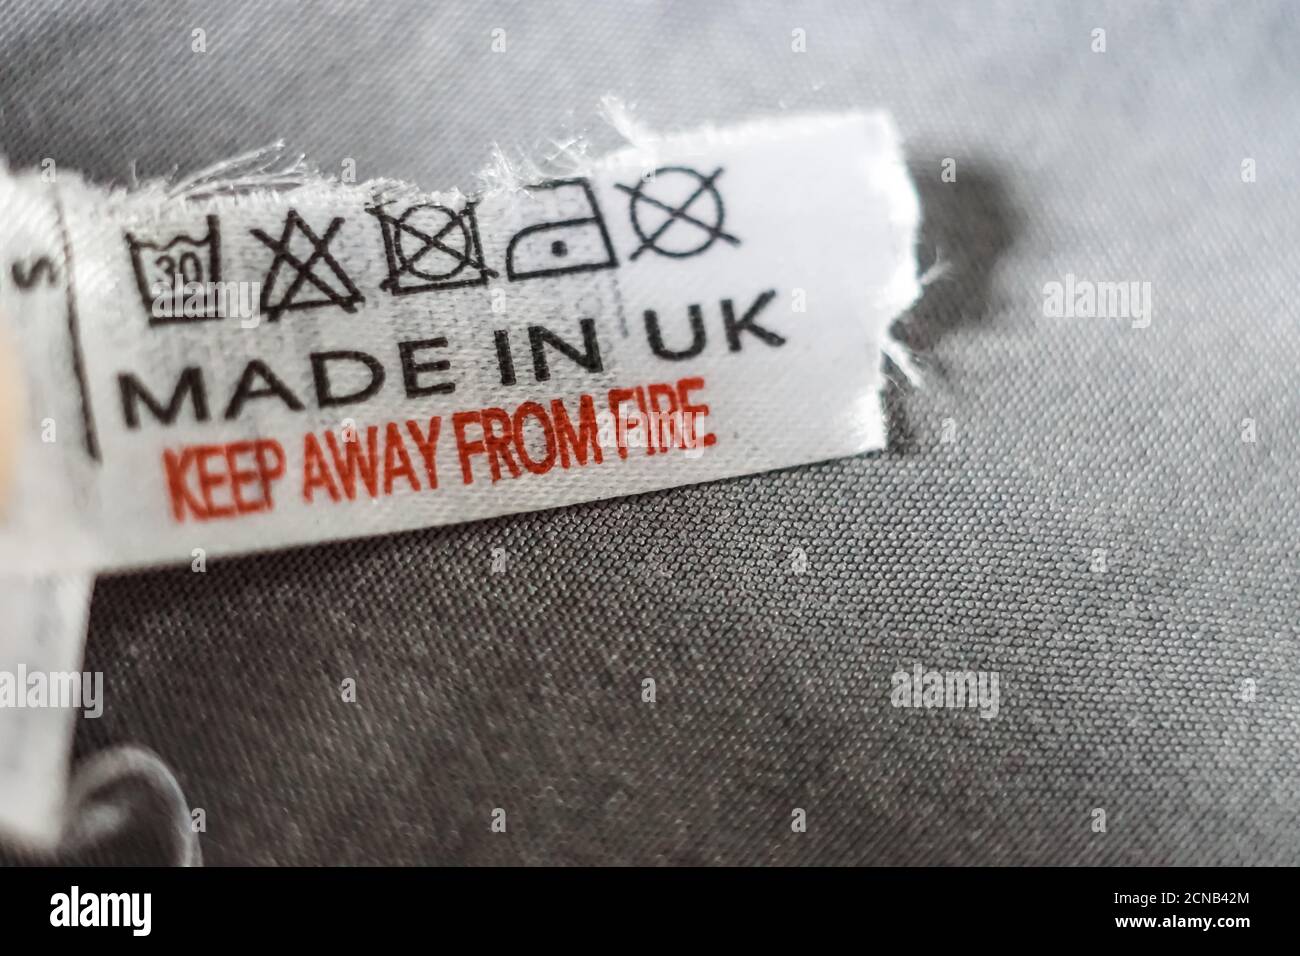 MADE IN UK Label Stock Photo